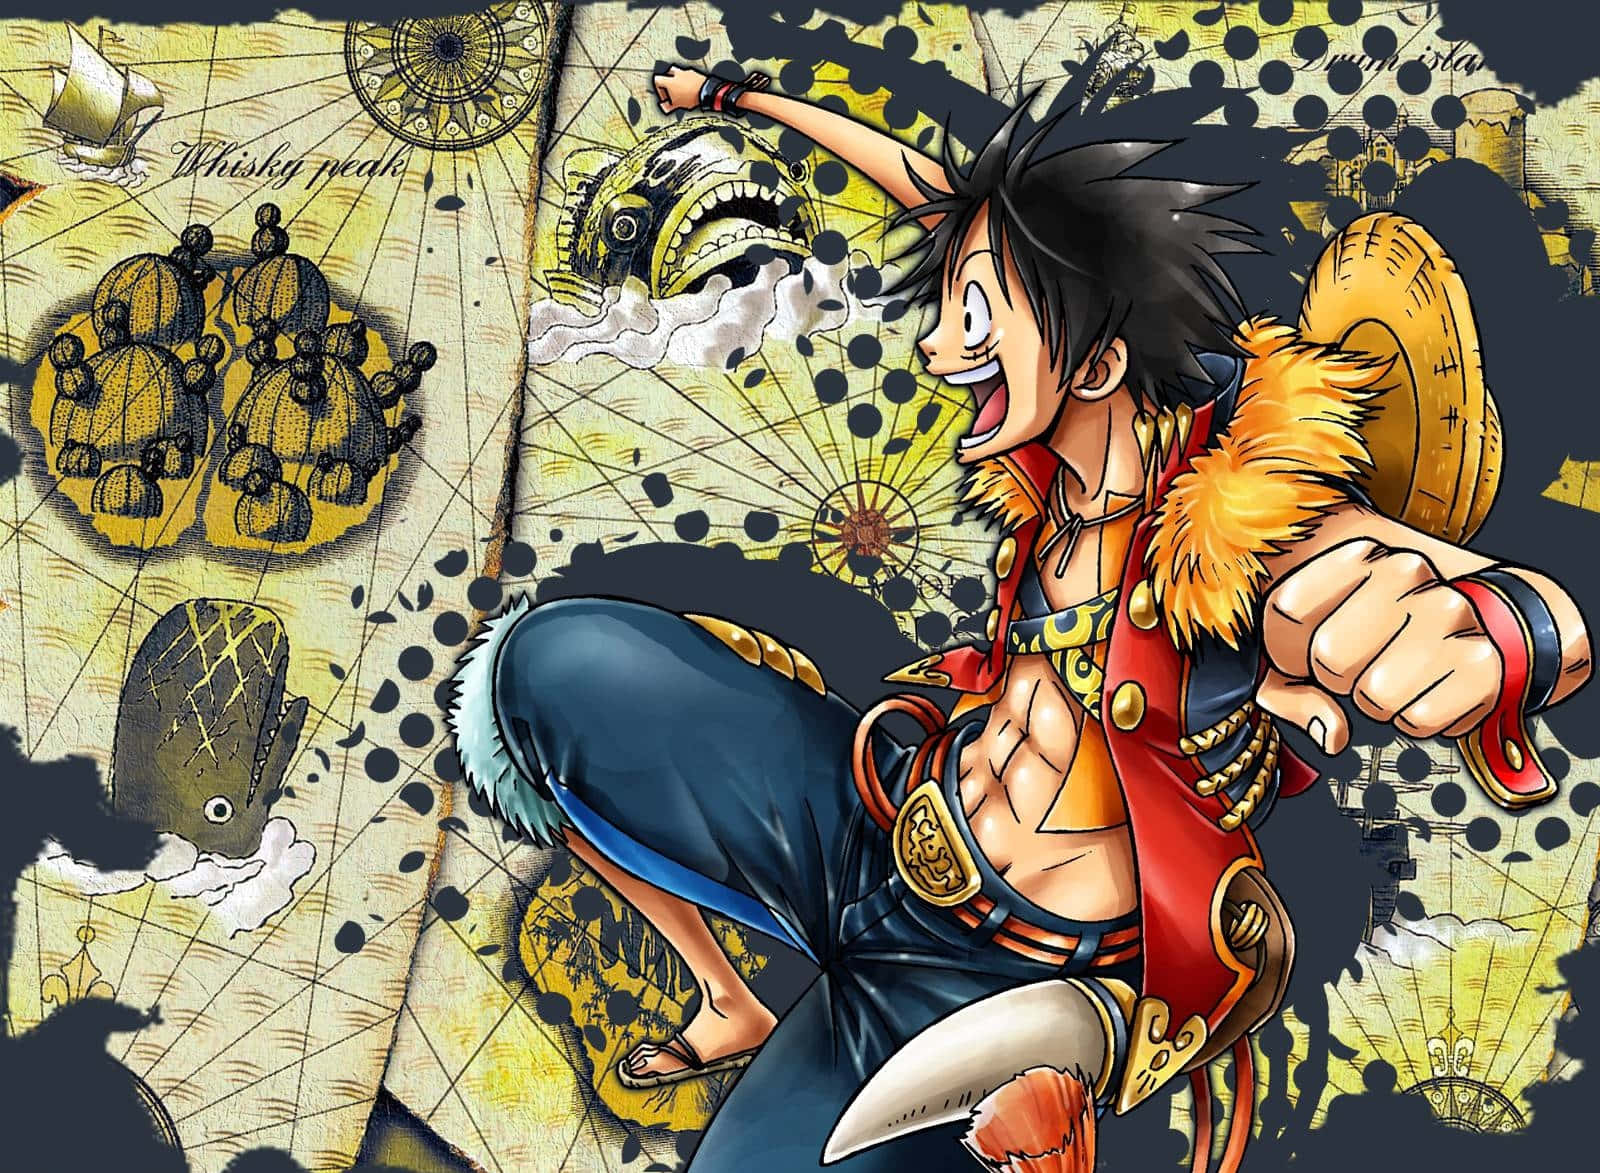 Monkey D. Luffy - One Piece [5] wallpaper - Anime wallpapers - #14065